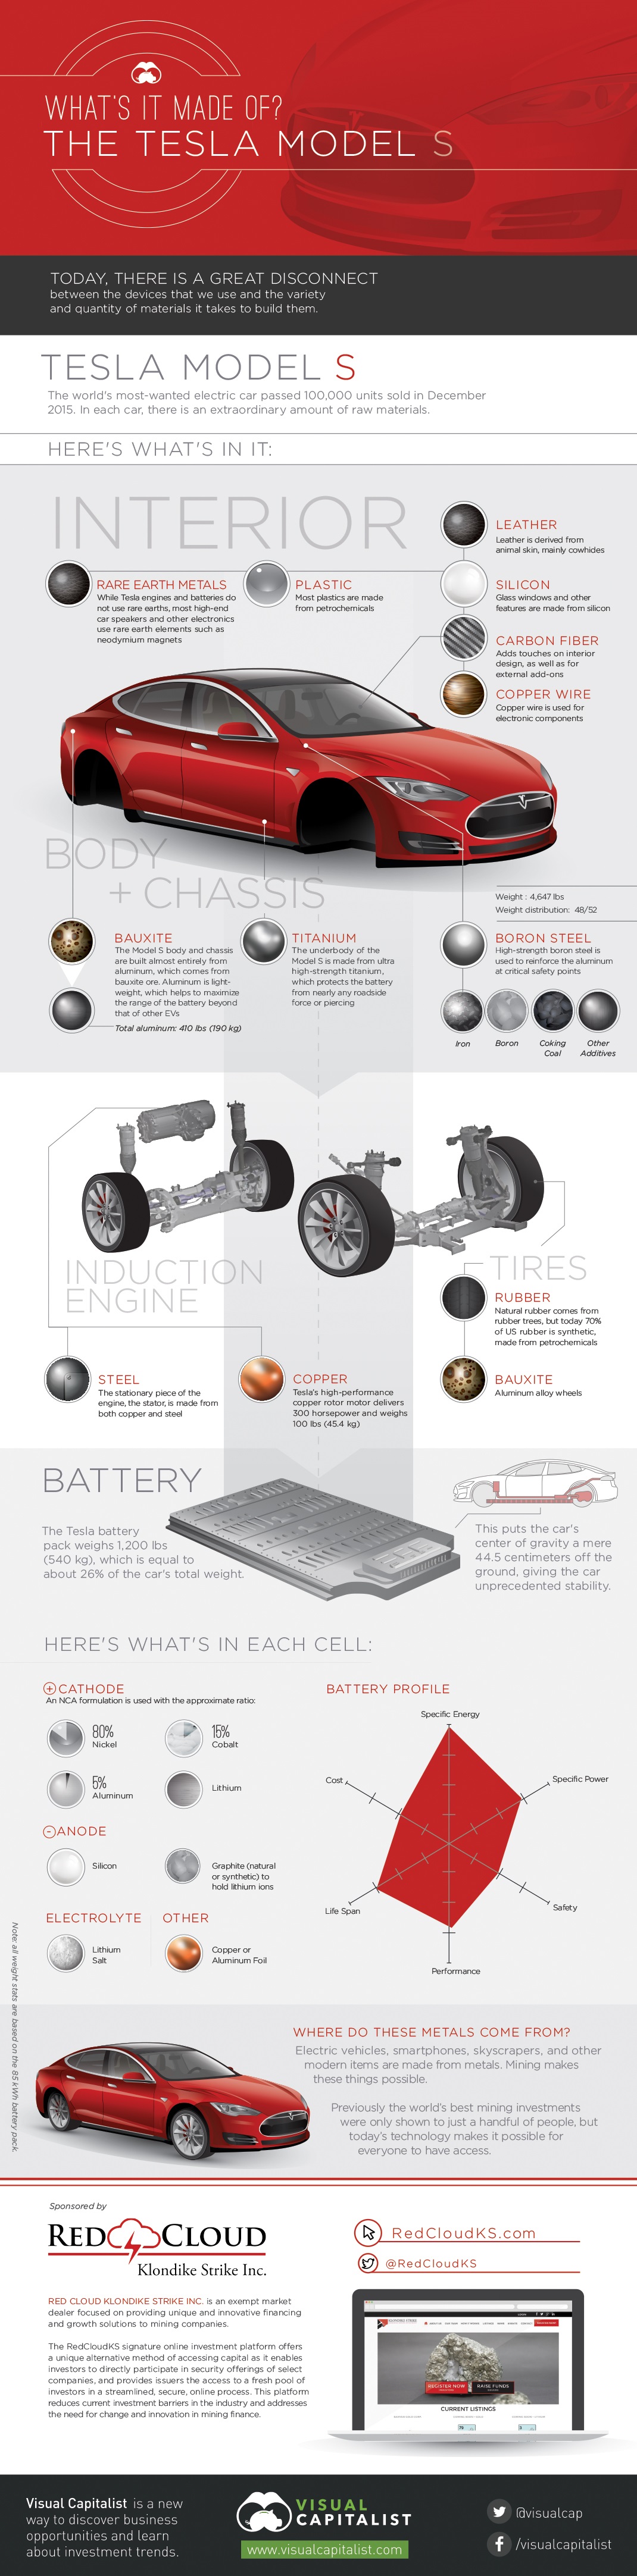 Extraordinary-Raw-Materials-In-A-Tesla-Model-S-Infographic.jpg